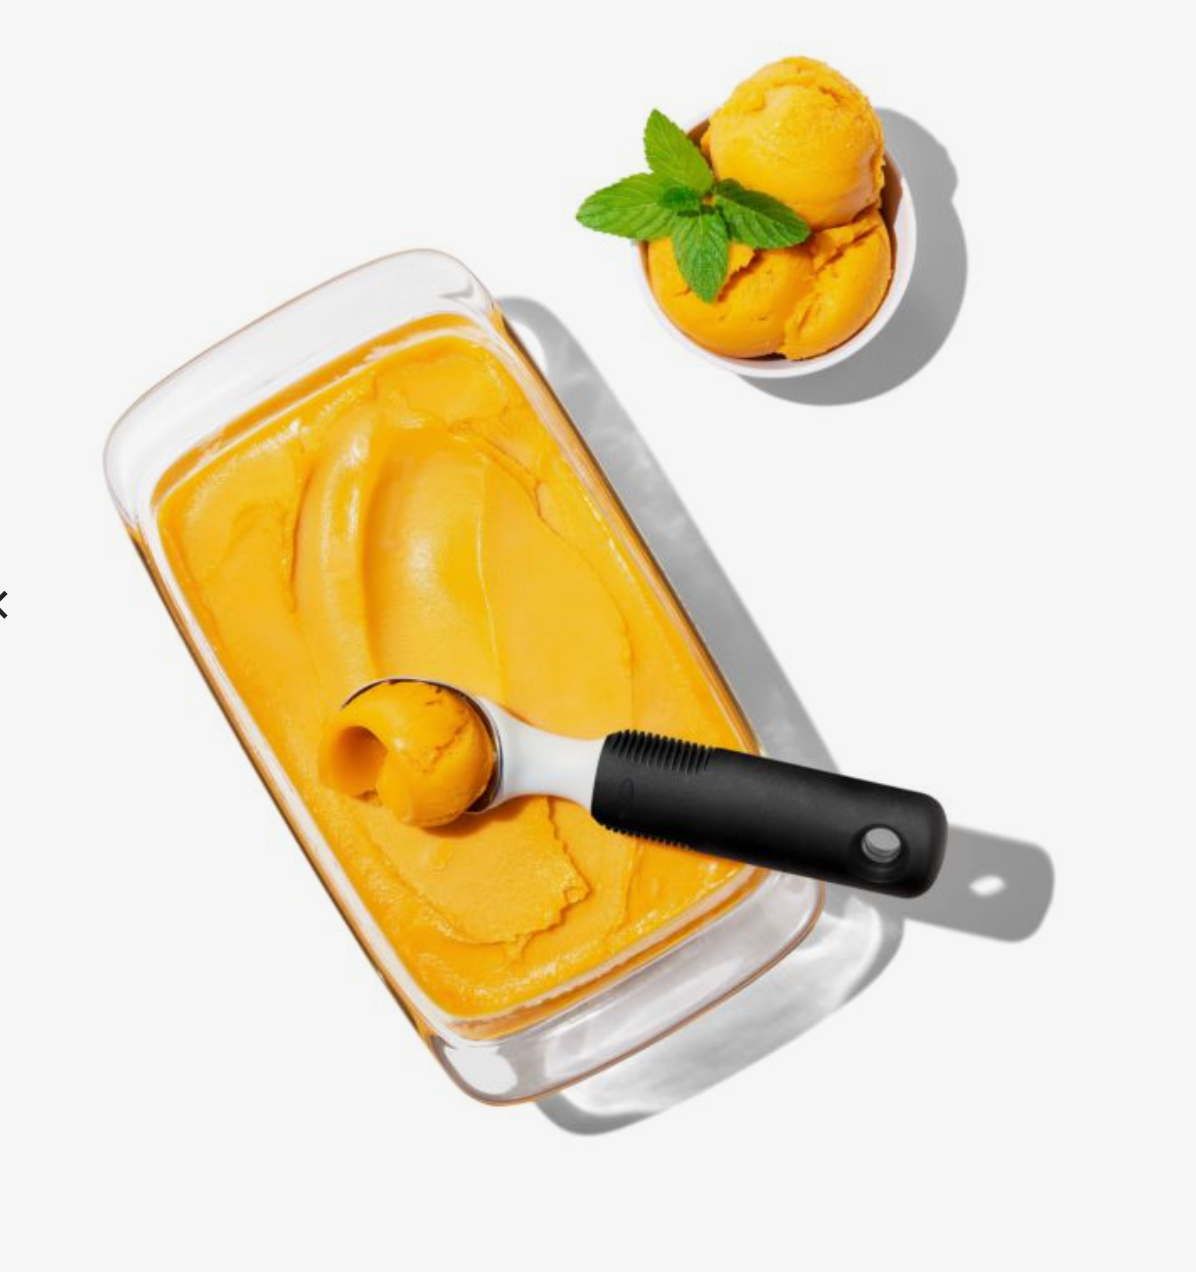 Stainless Steel Ice Cream Scoop With Trigger Lever and Yellow Grip